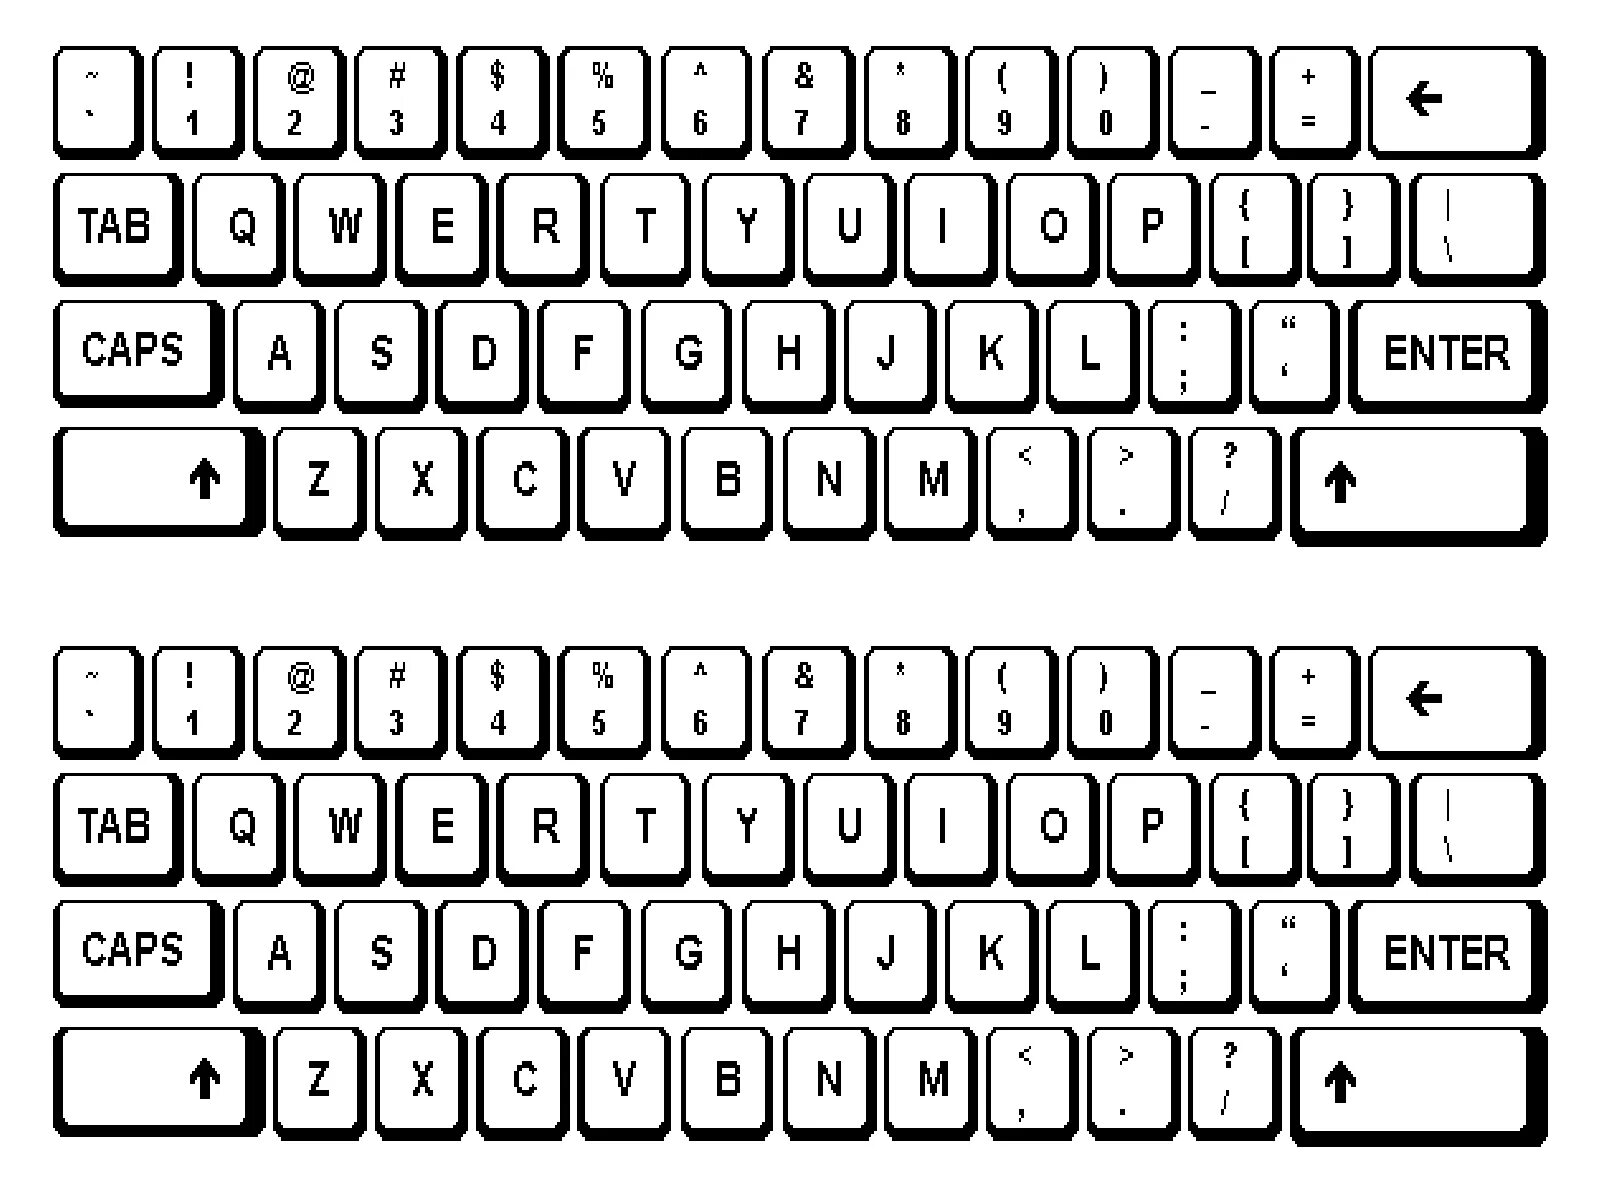 Colourful keyboard layout coloring page